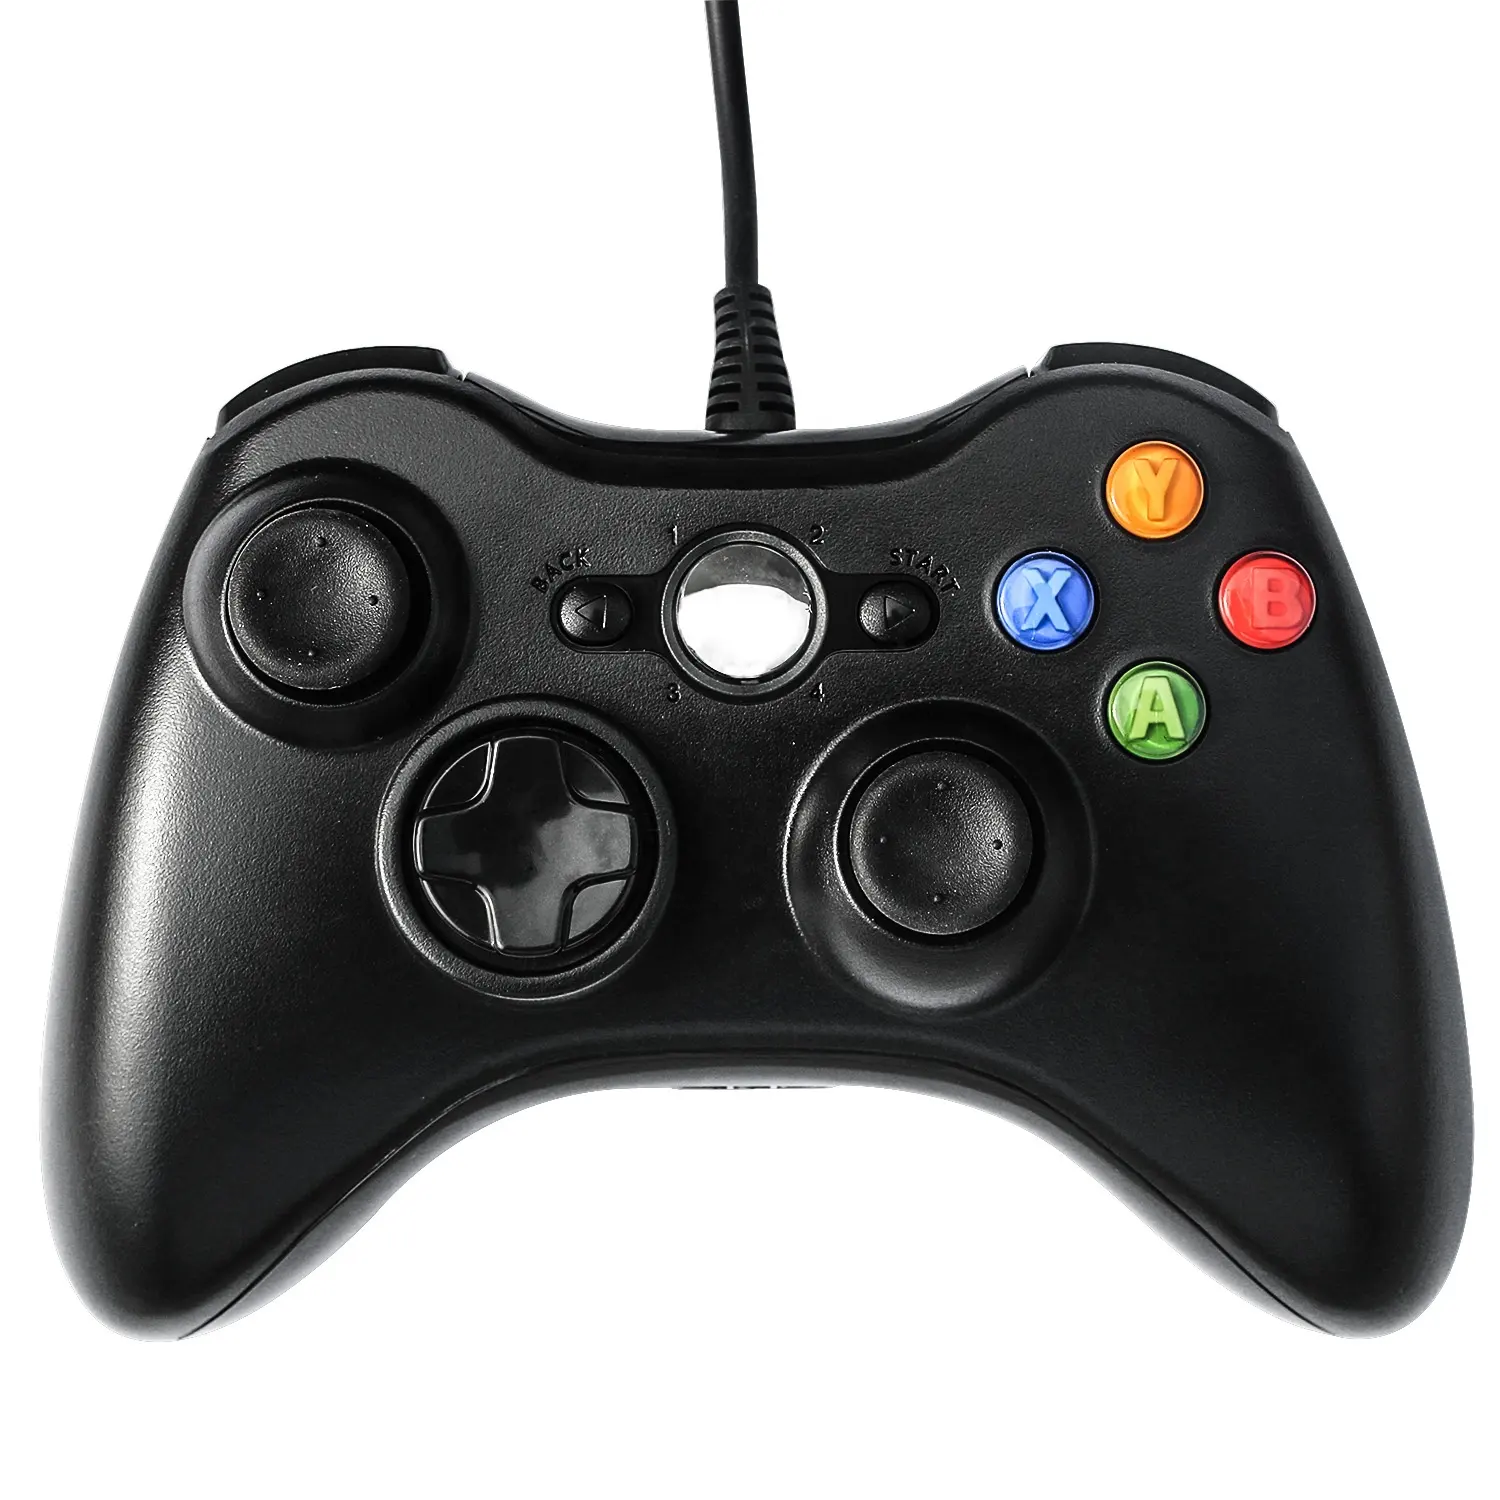 Xbox 360 Wired Gamepad Controller for Xbox360 Console Joystick and PC